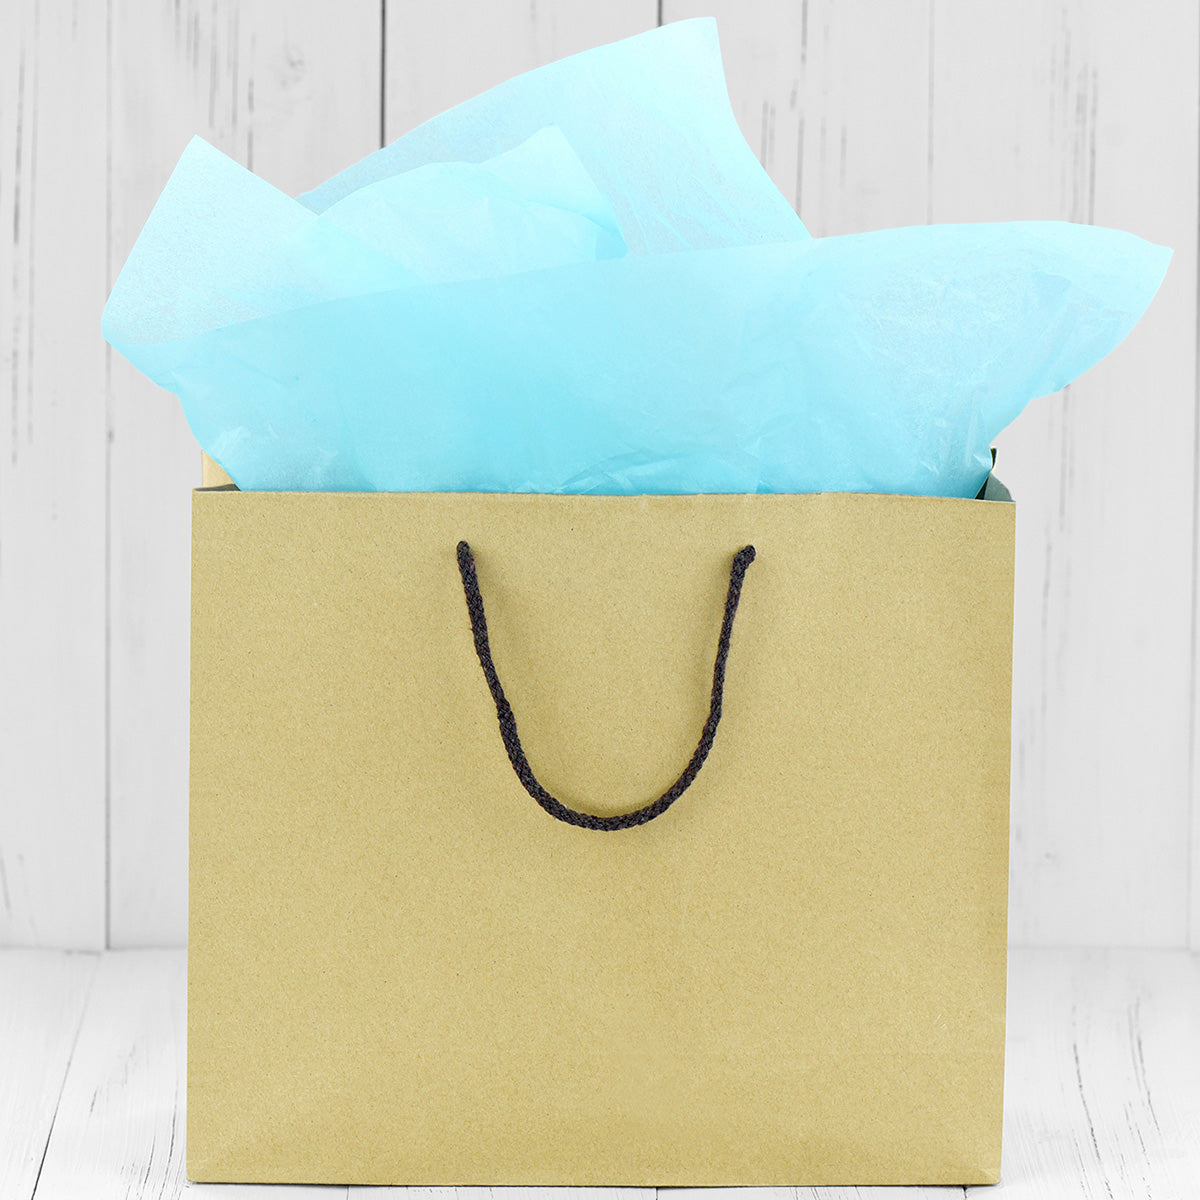 50 Sheets Light Blue Wrapping Tissue Paper